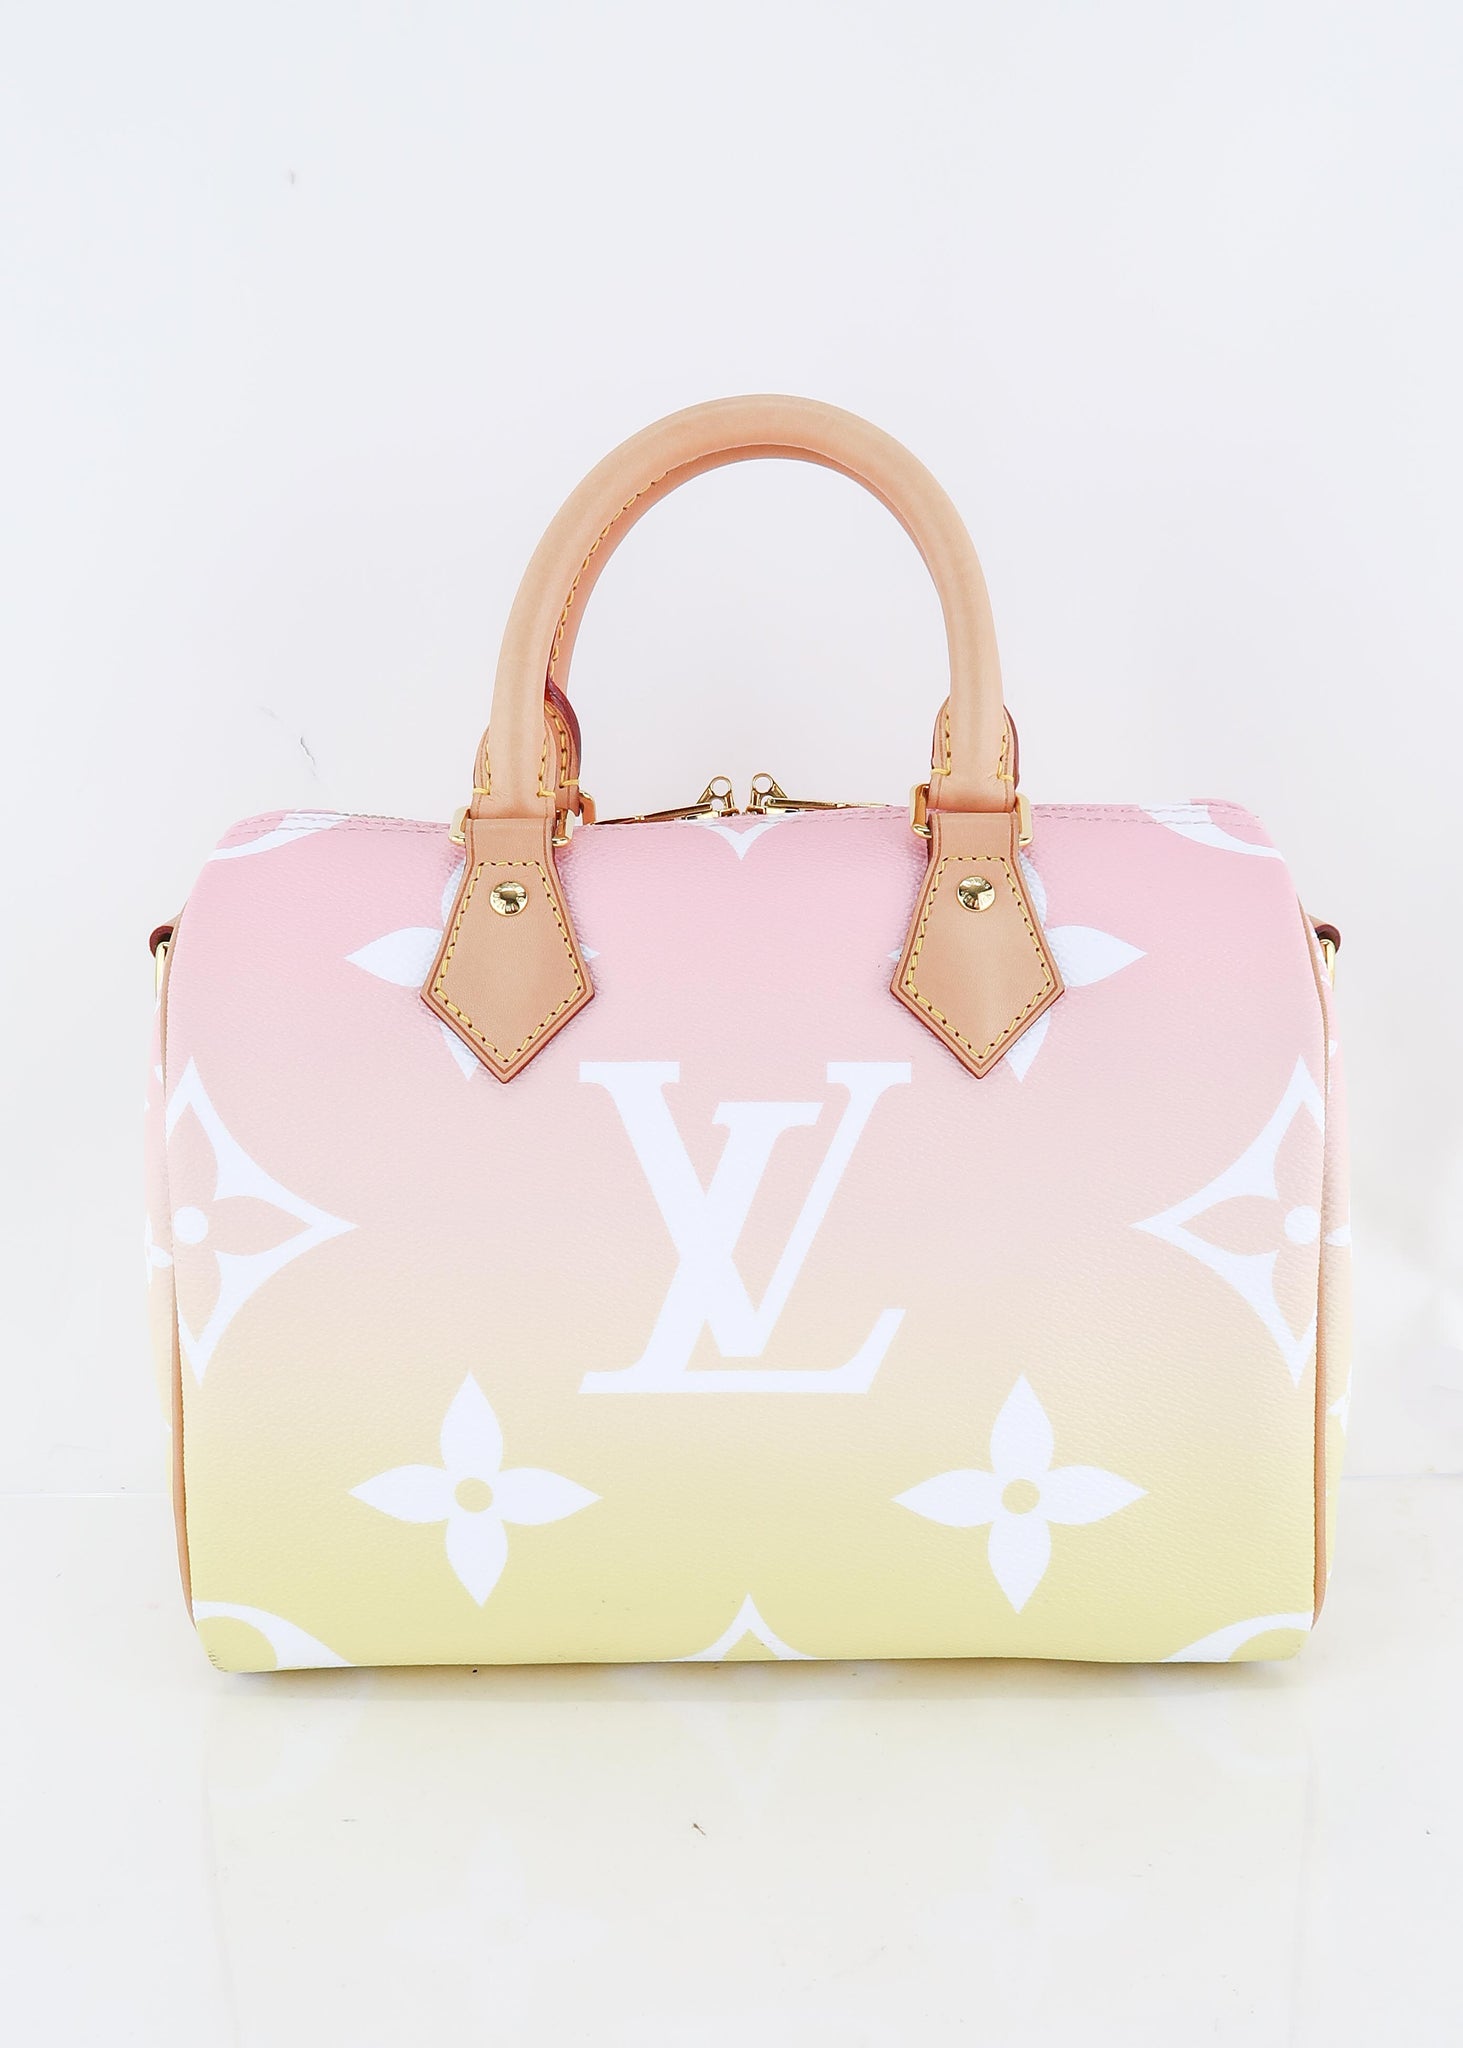 Louis Vuitton By the Pool Speedy 25, New in Dustbag - Julia Rose